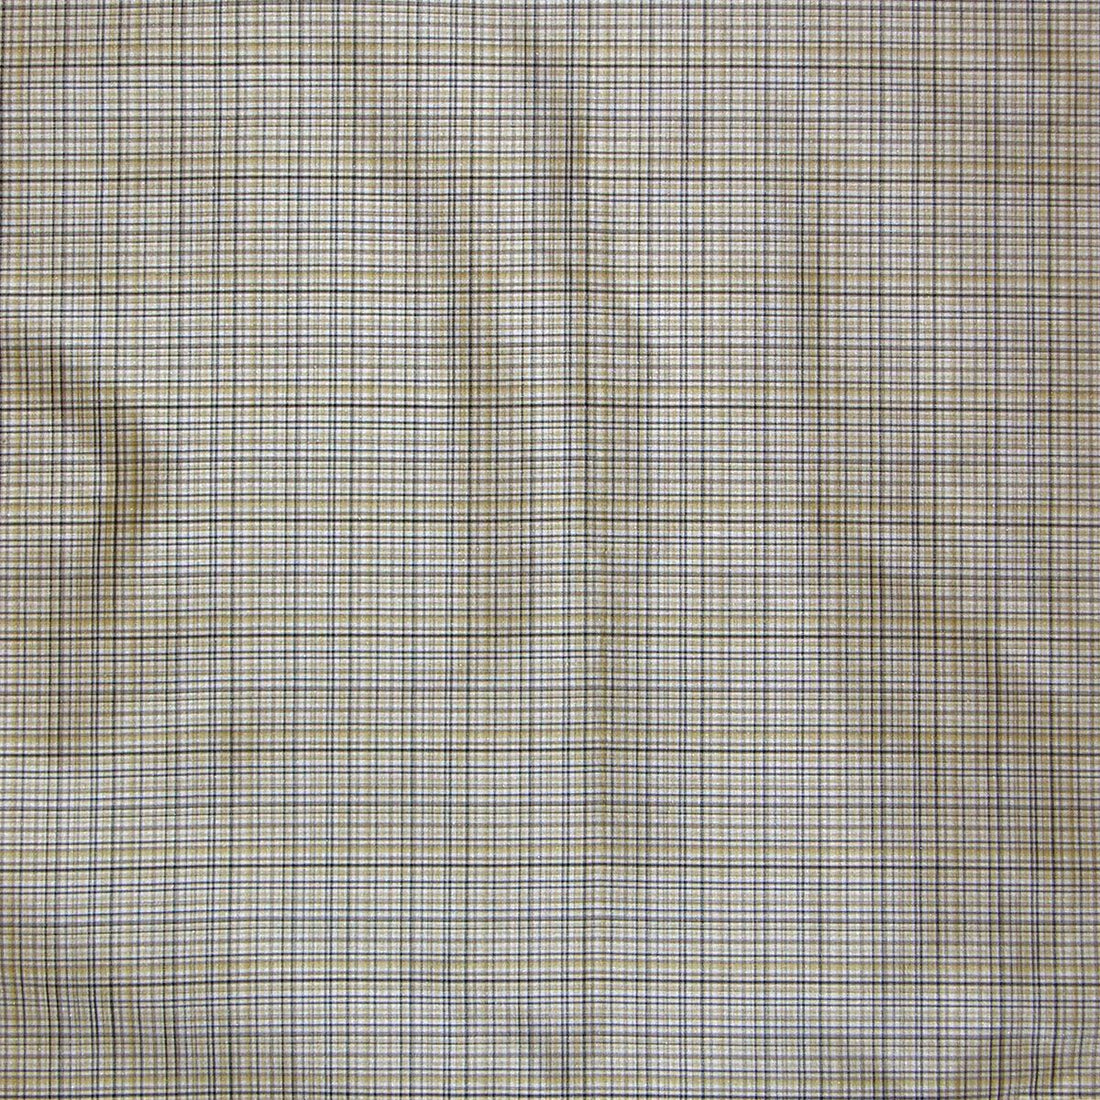 T &amp; A Check fabric in parchment color - pattern number SQ 00014308 - by Scalamandre in the Old World Weavers collection